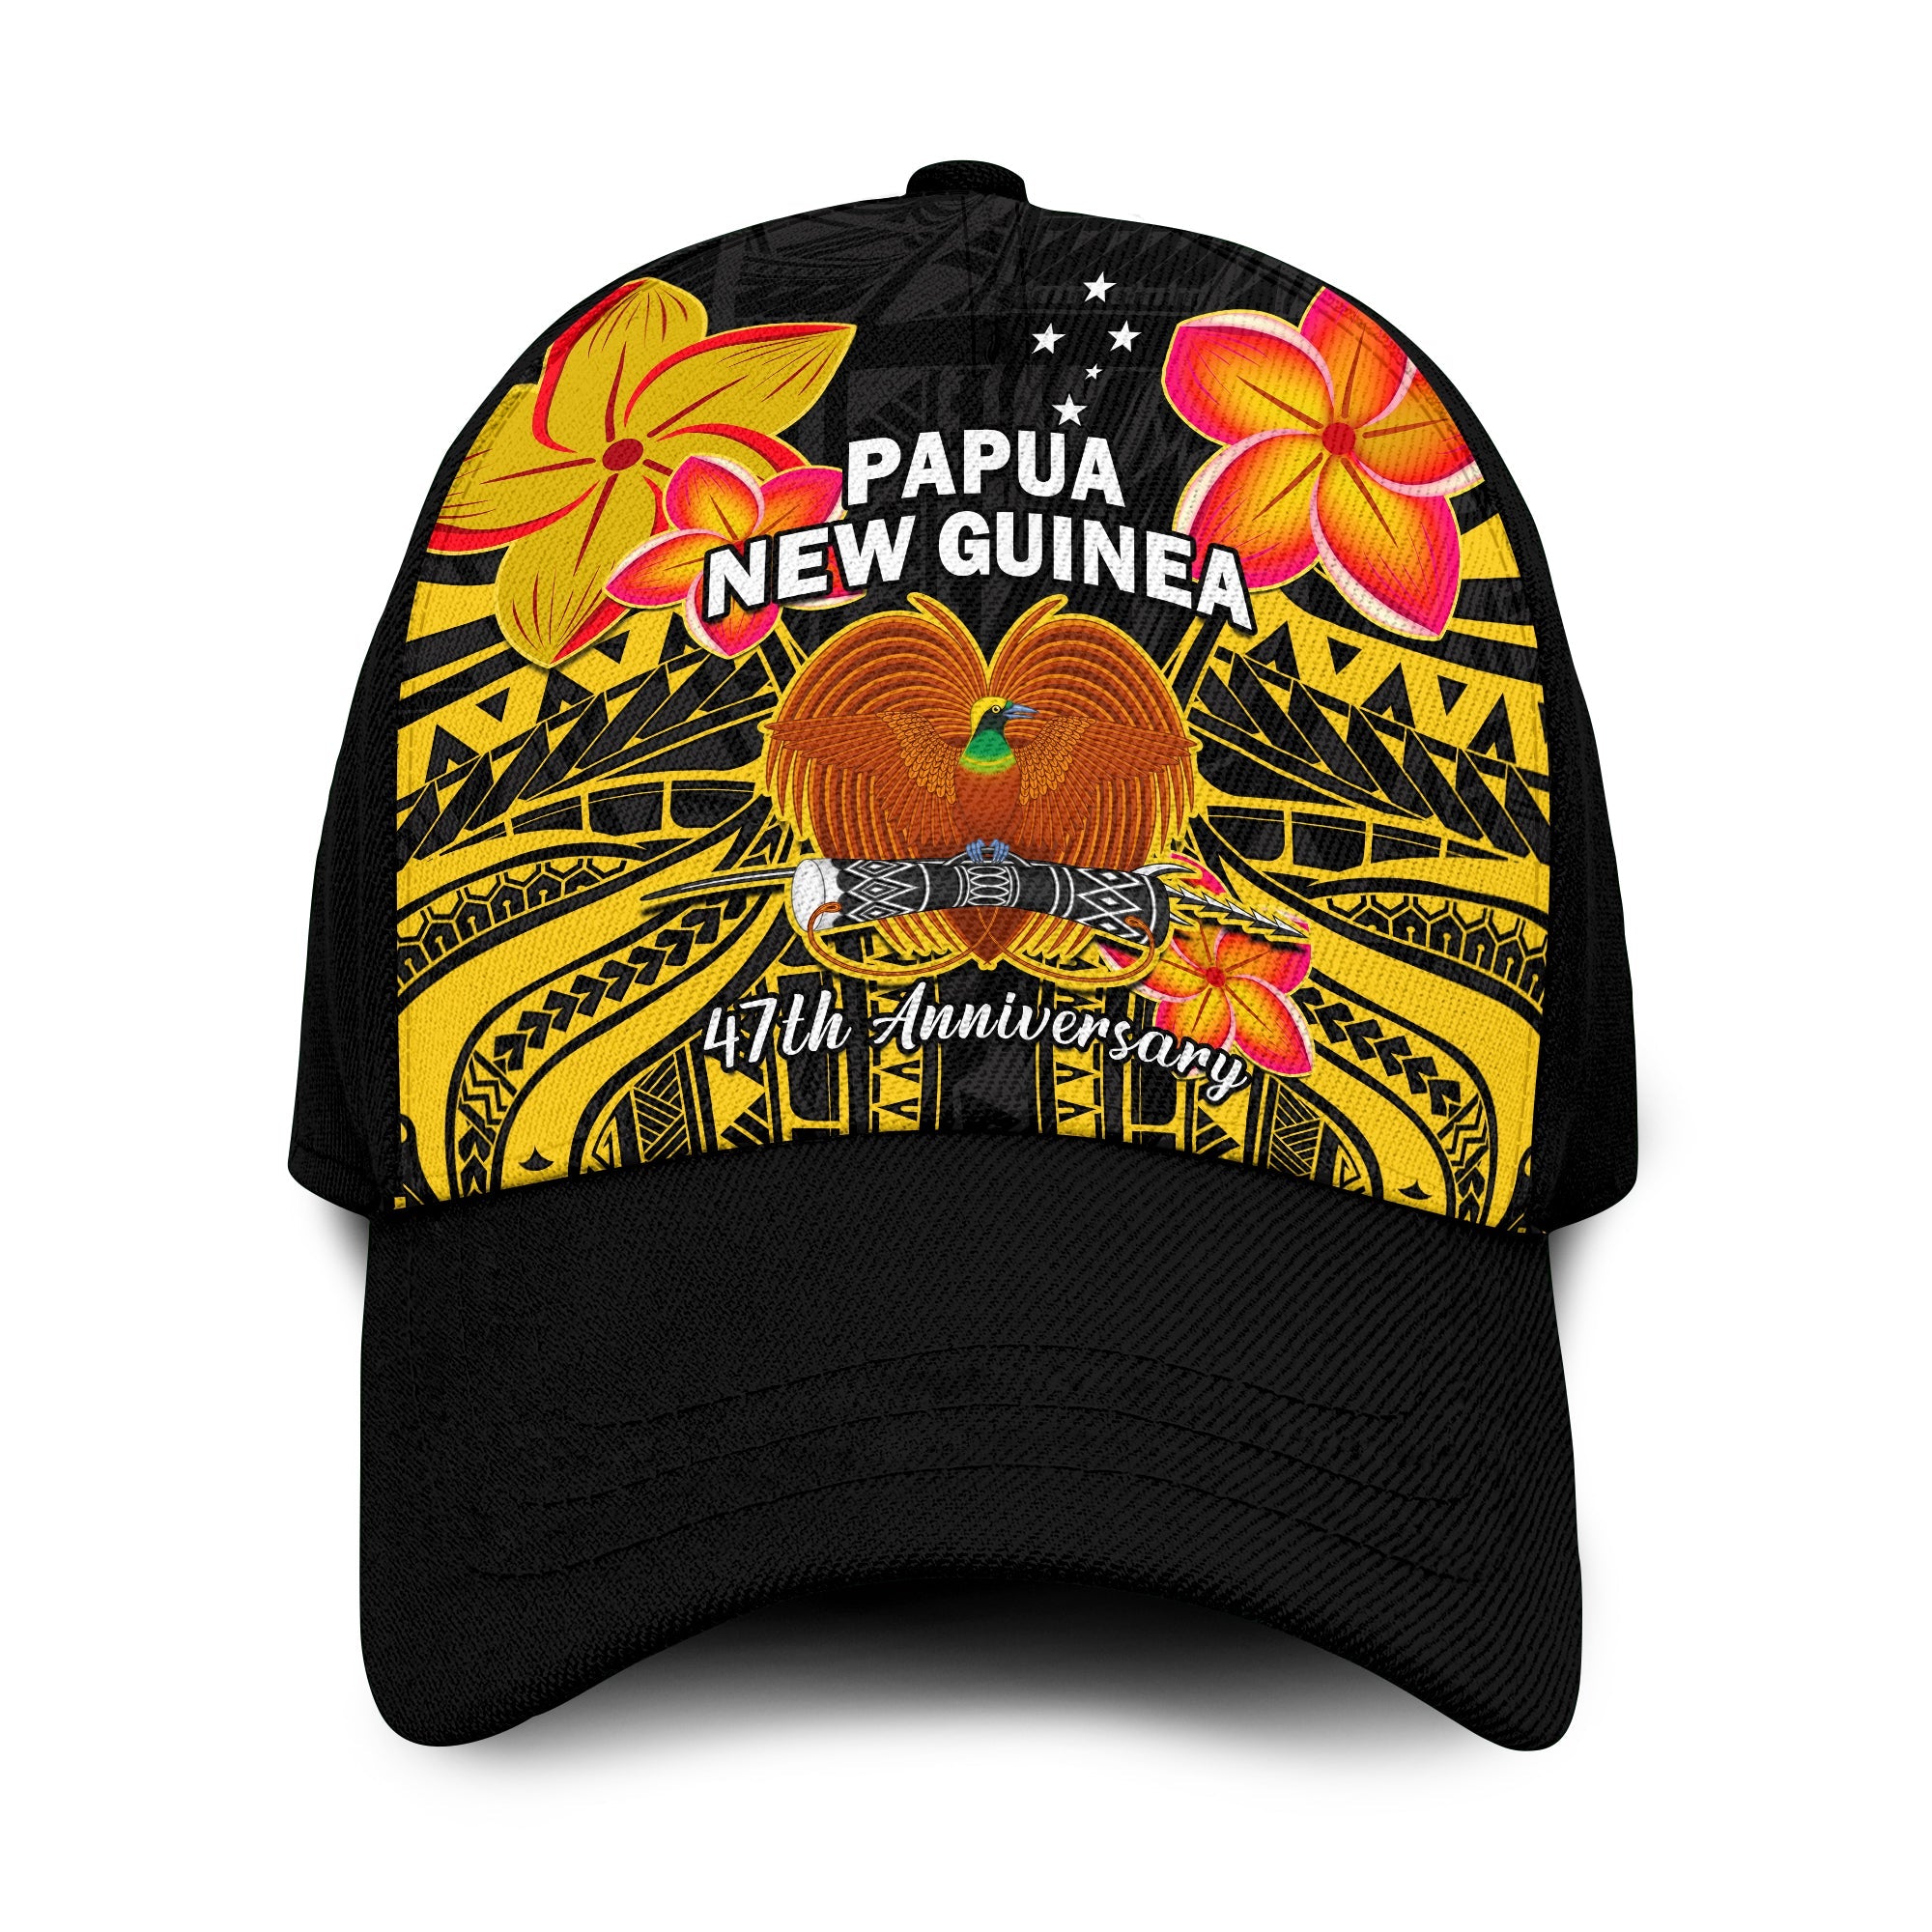 Papua New Guinea Classic Cap PNG 47 Years Independence Anniversary Ver.06 LT14 Classic Cap Universal Fit Yellow - Polynesian Pride